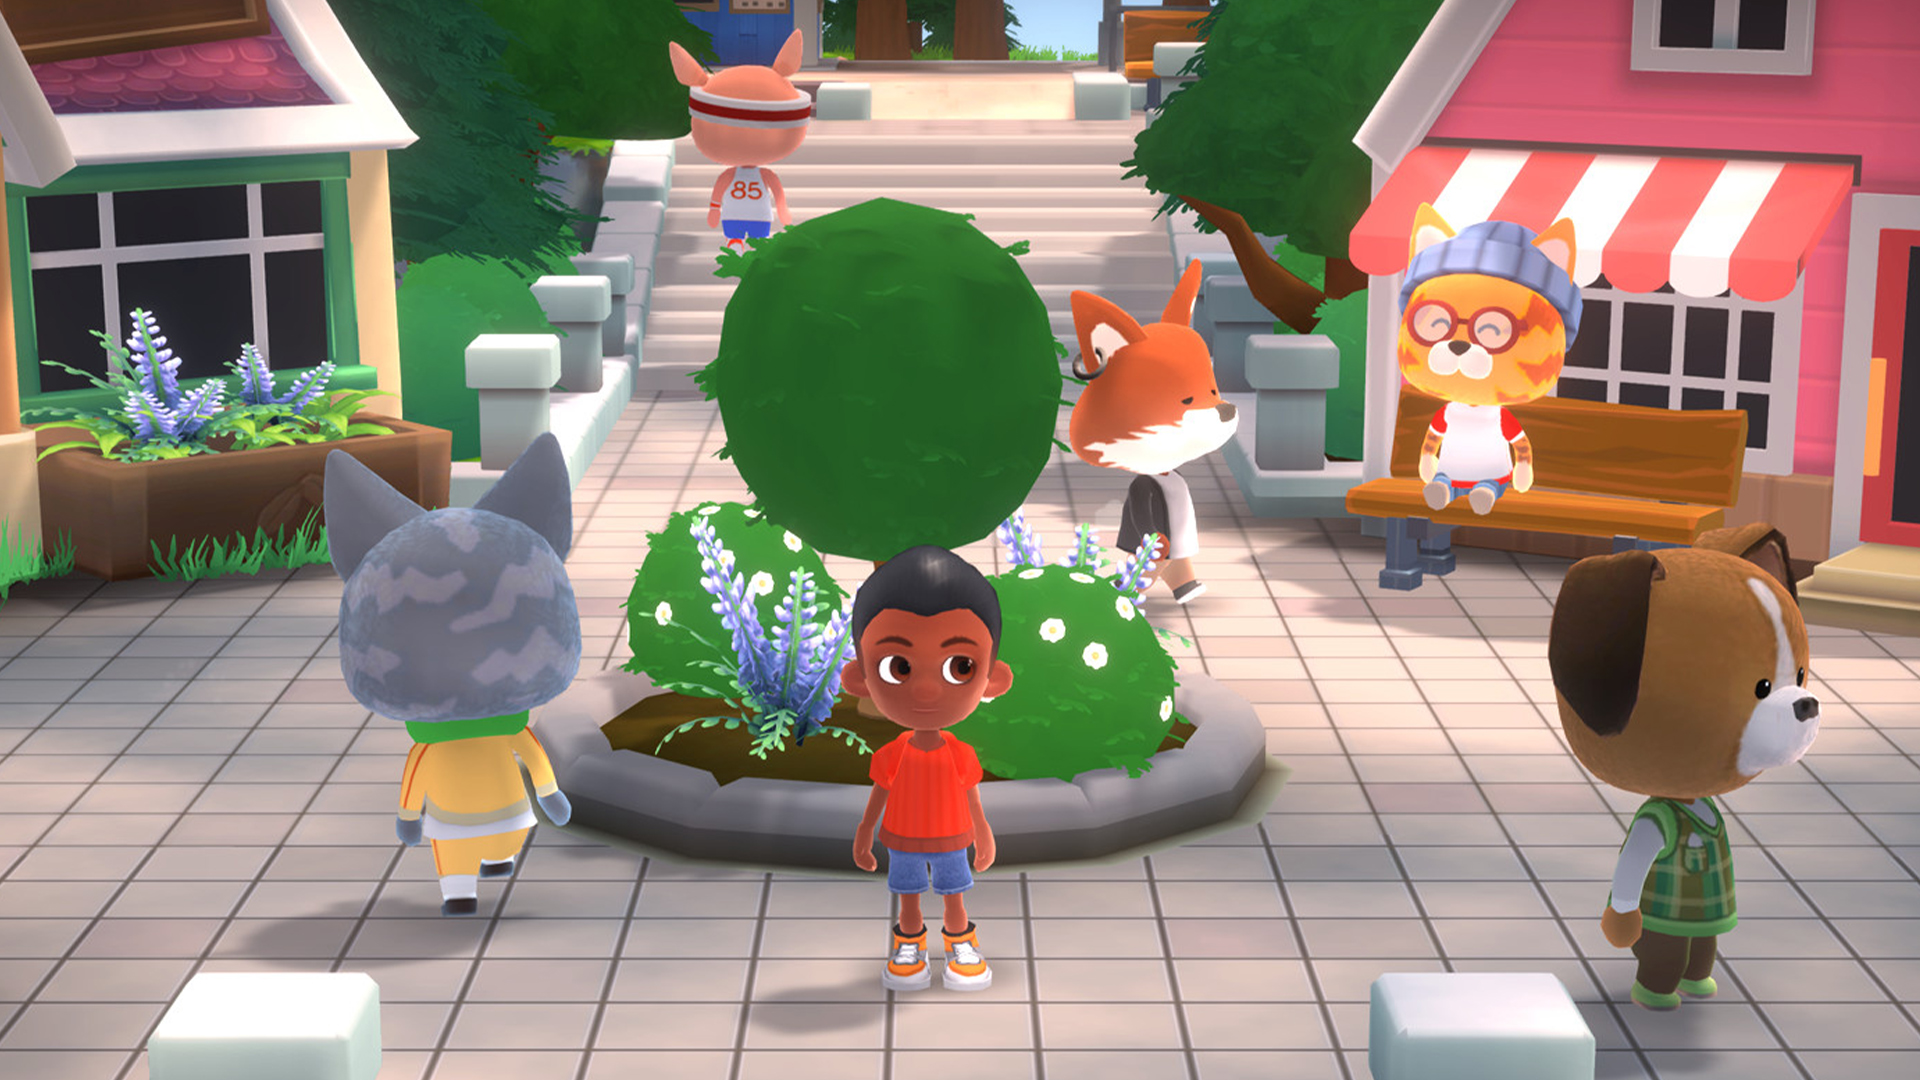 Want an Animal Crossing PC game? Here are seven alternatives